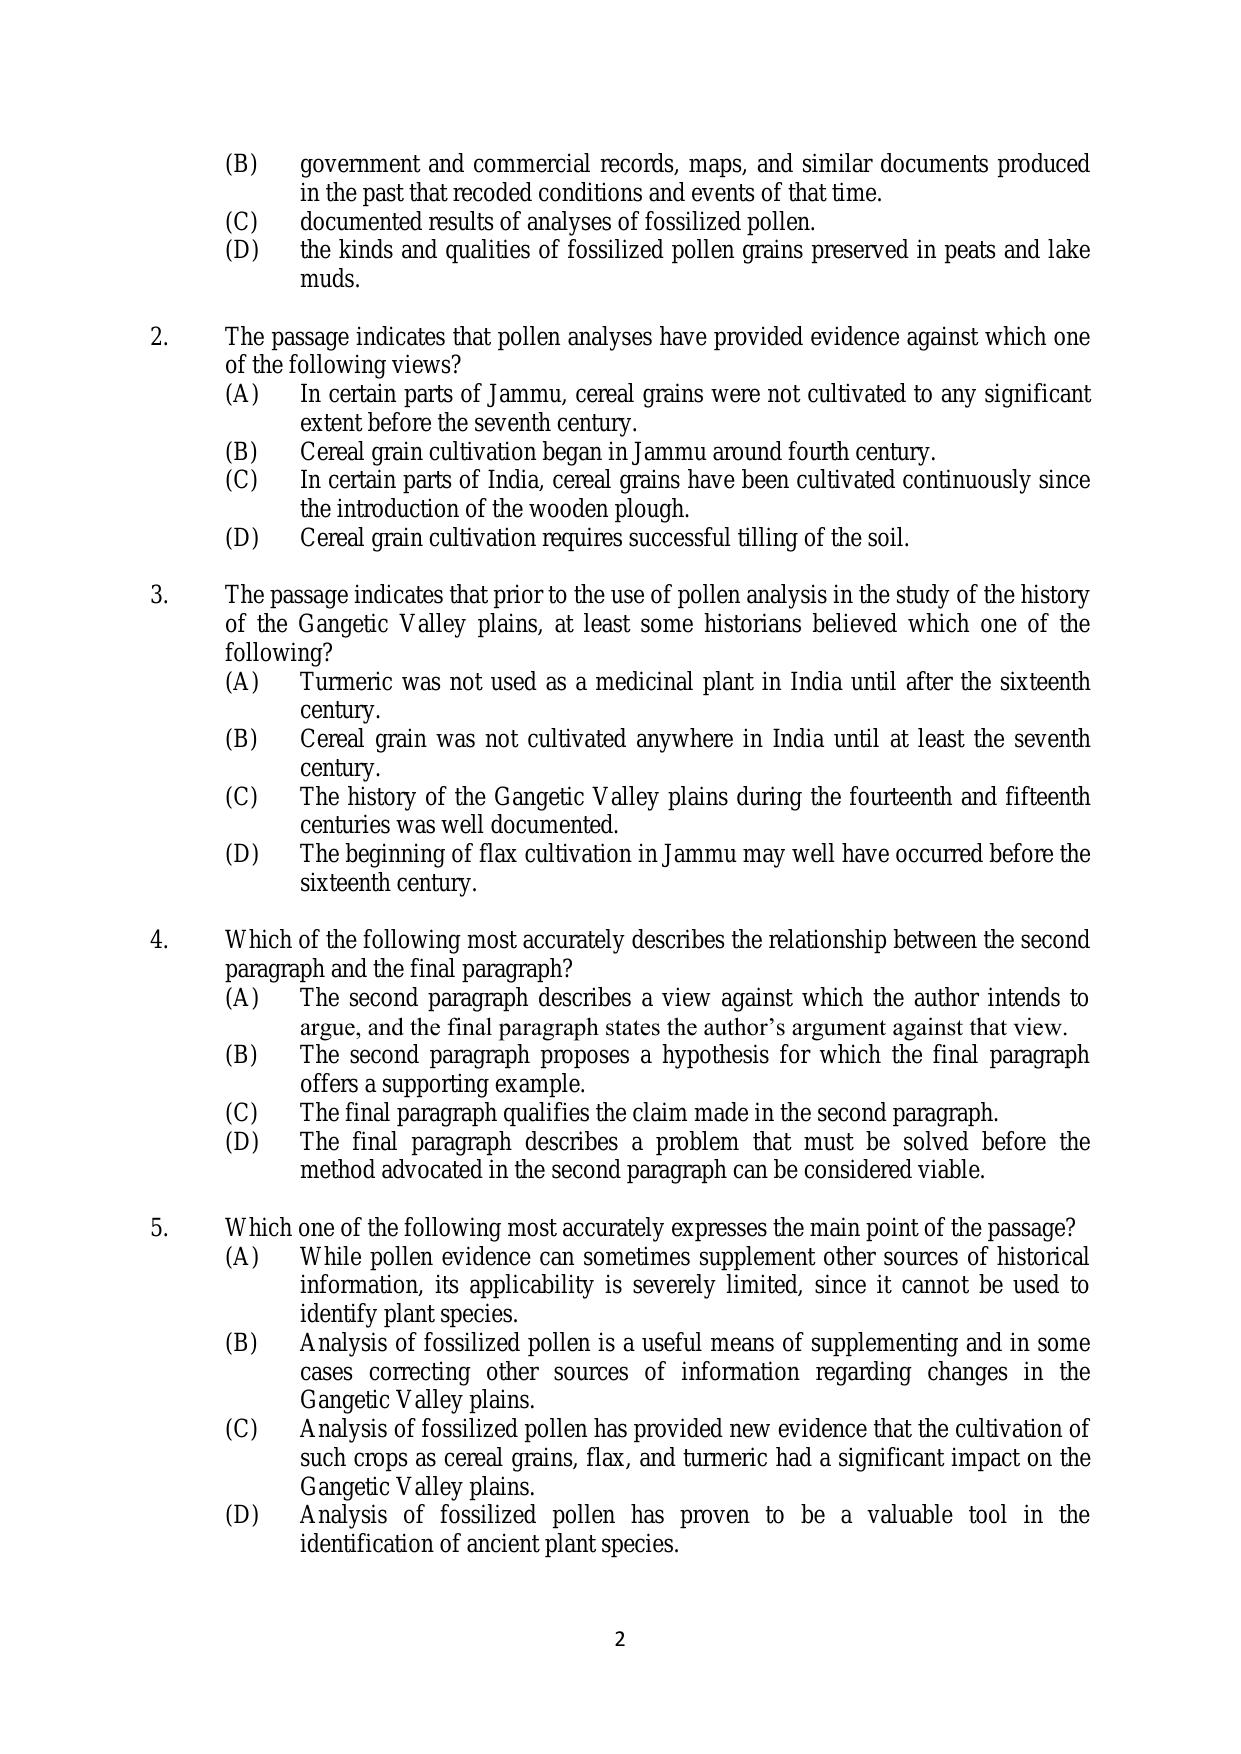 AILET 2020 Question Paper for BA LLB - Page 2